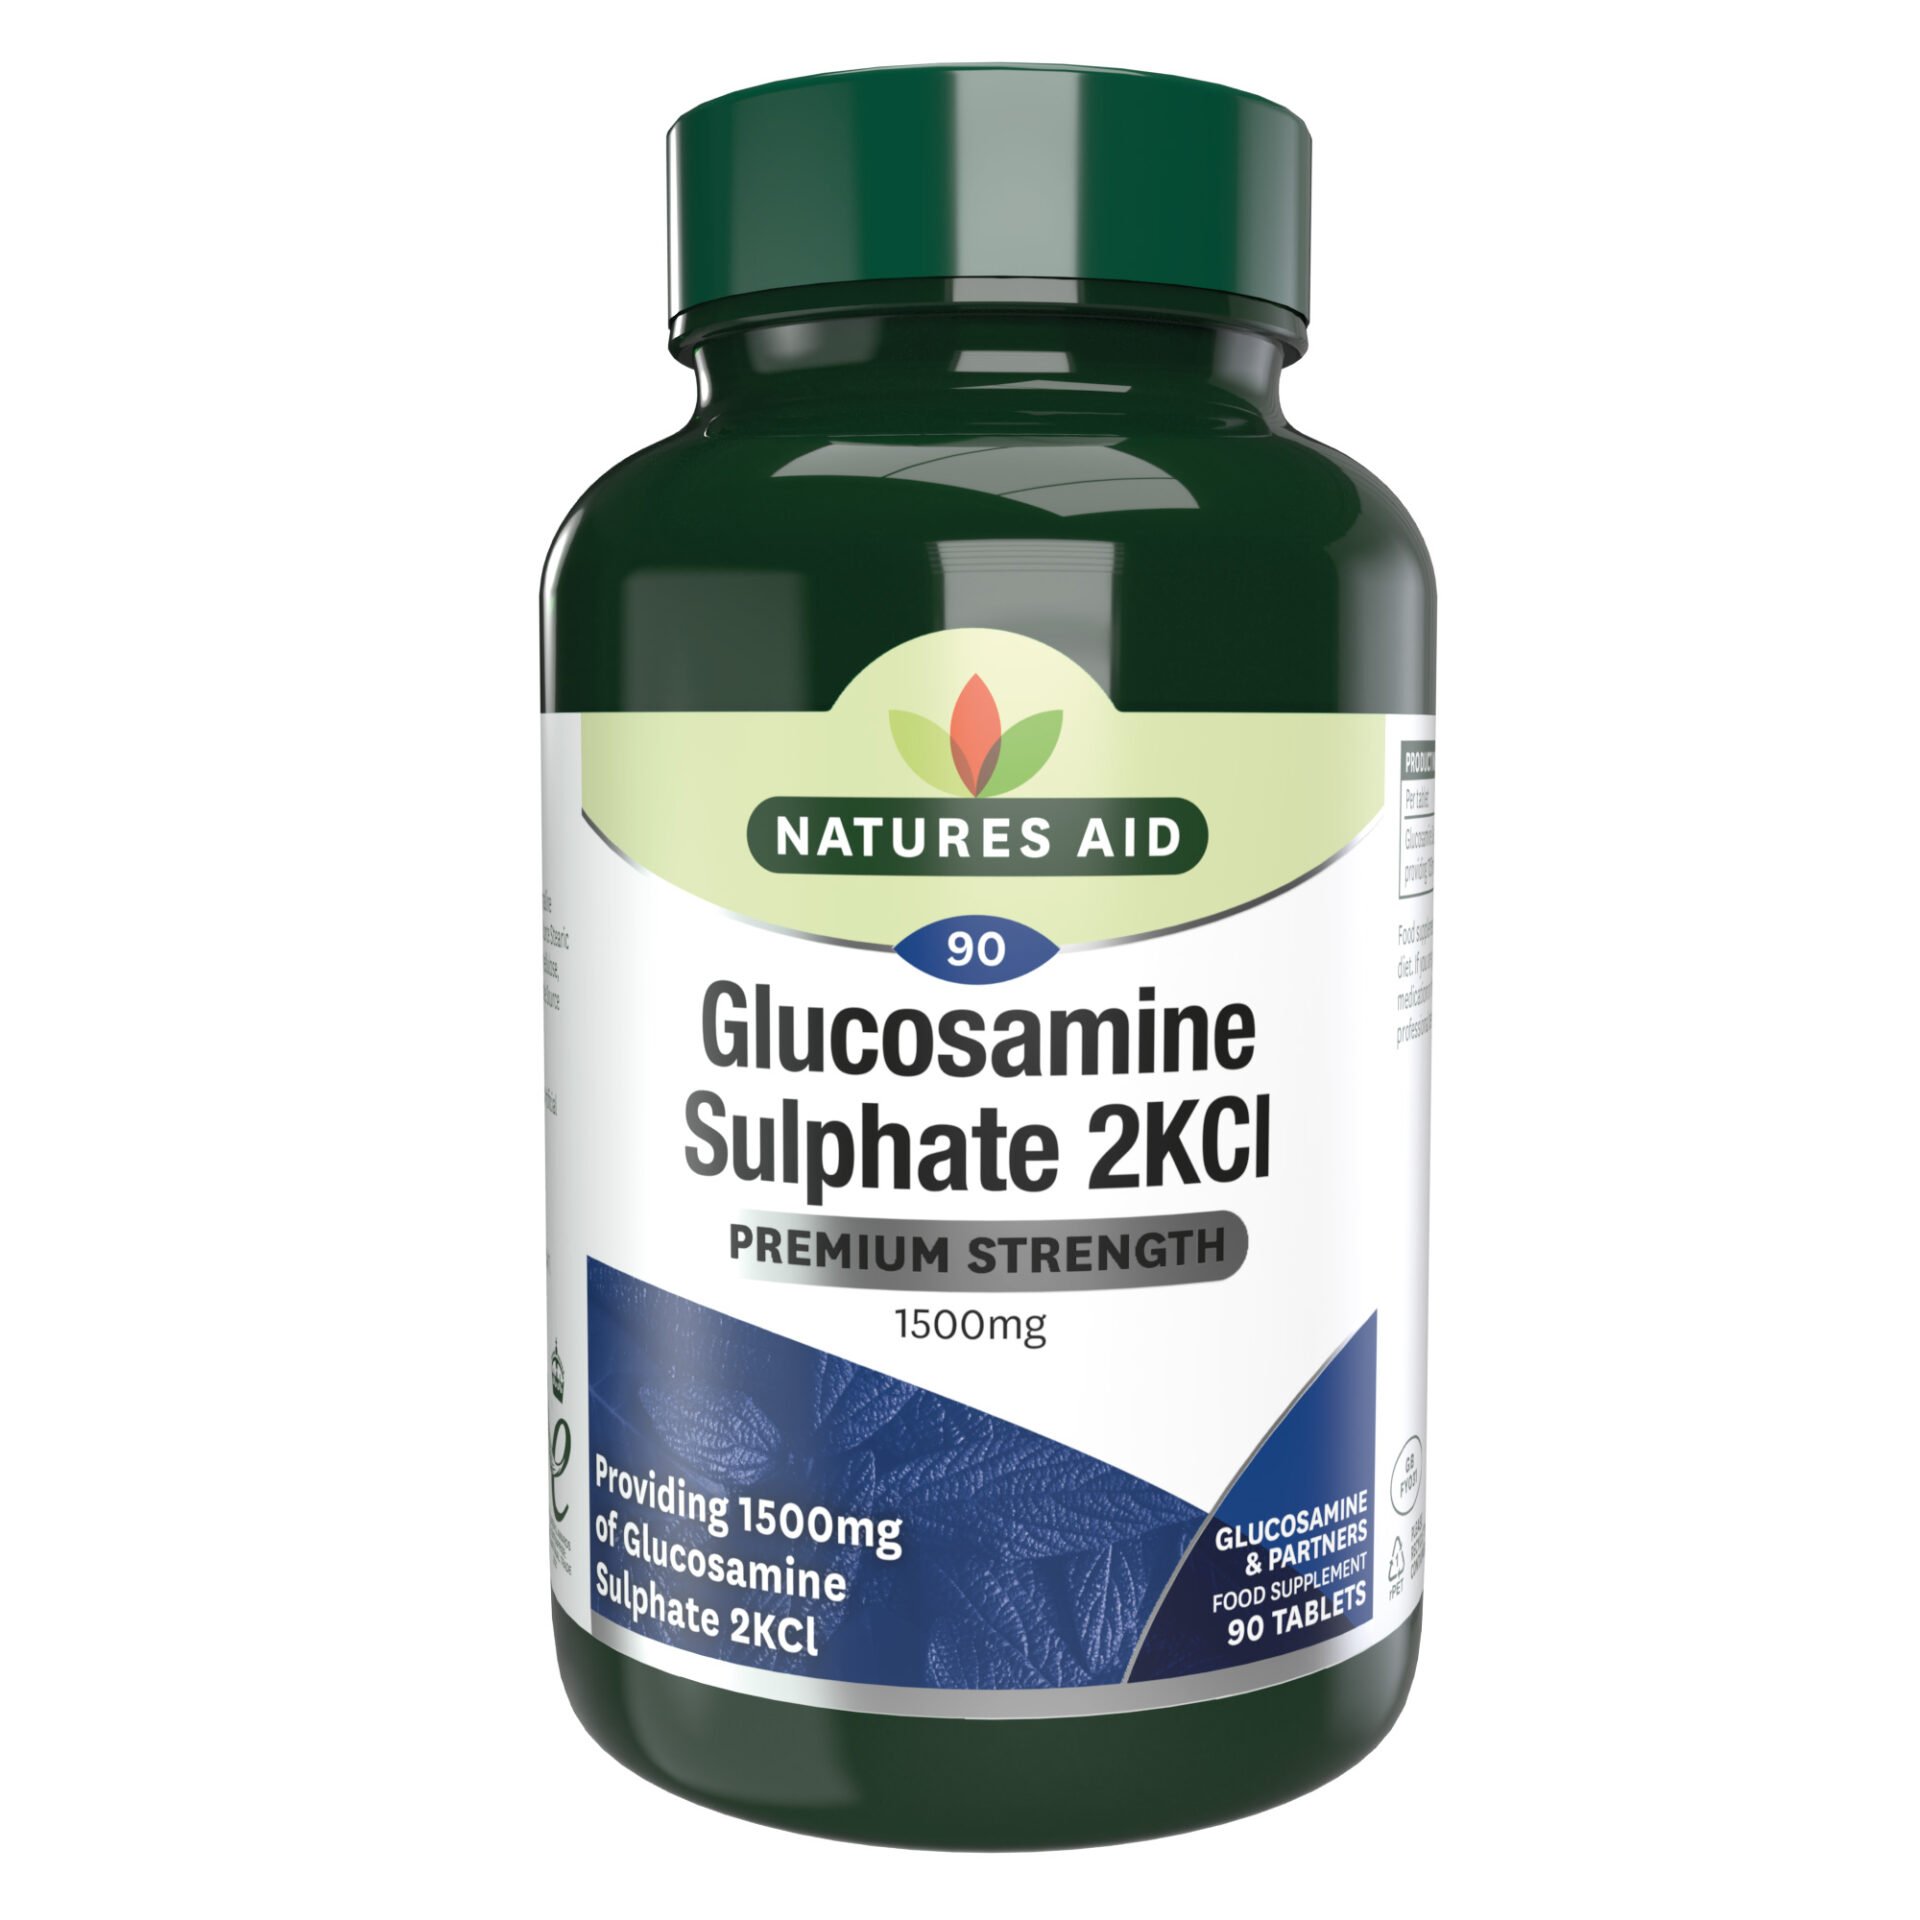 Natures Aid Glucosamine Sulphate 2KCI 1500mg